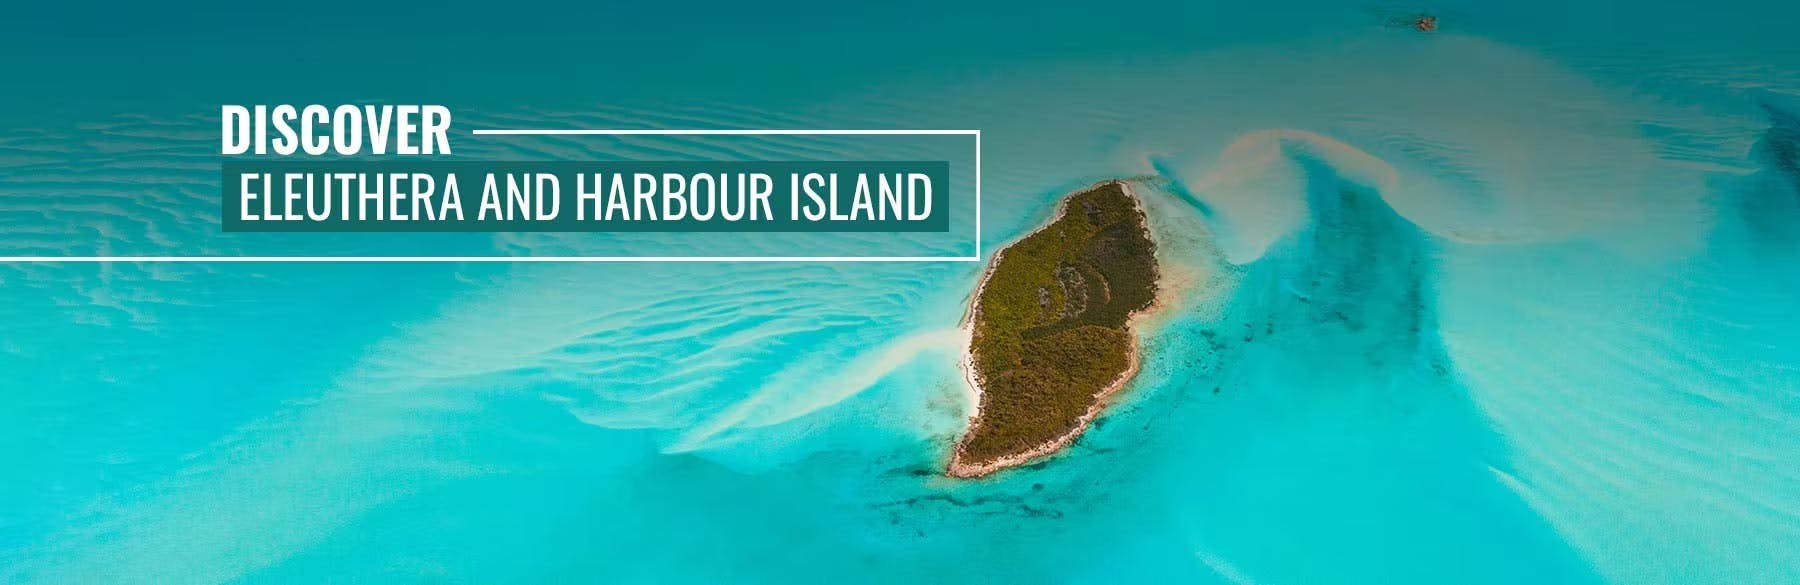 Eleuthera And Harbour Island